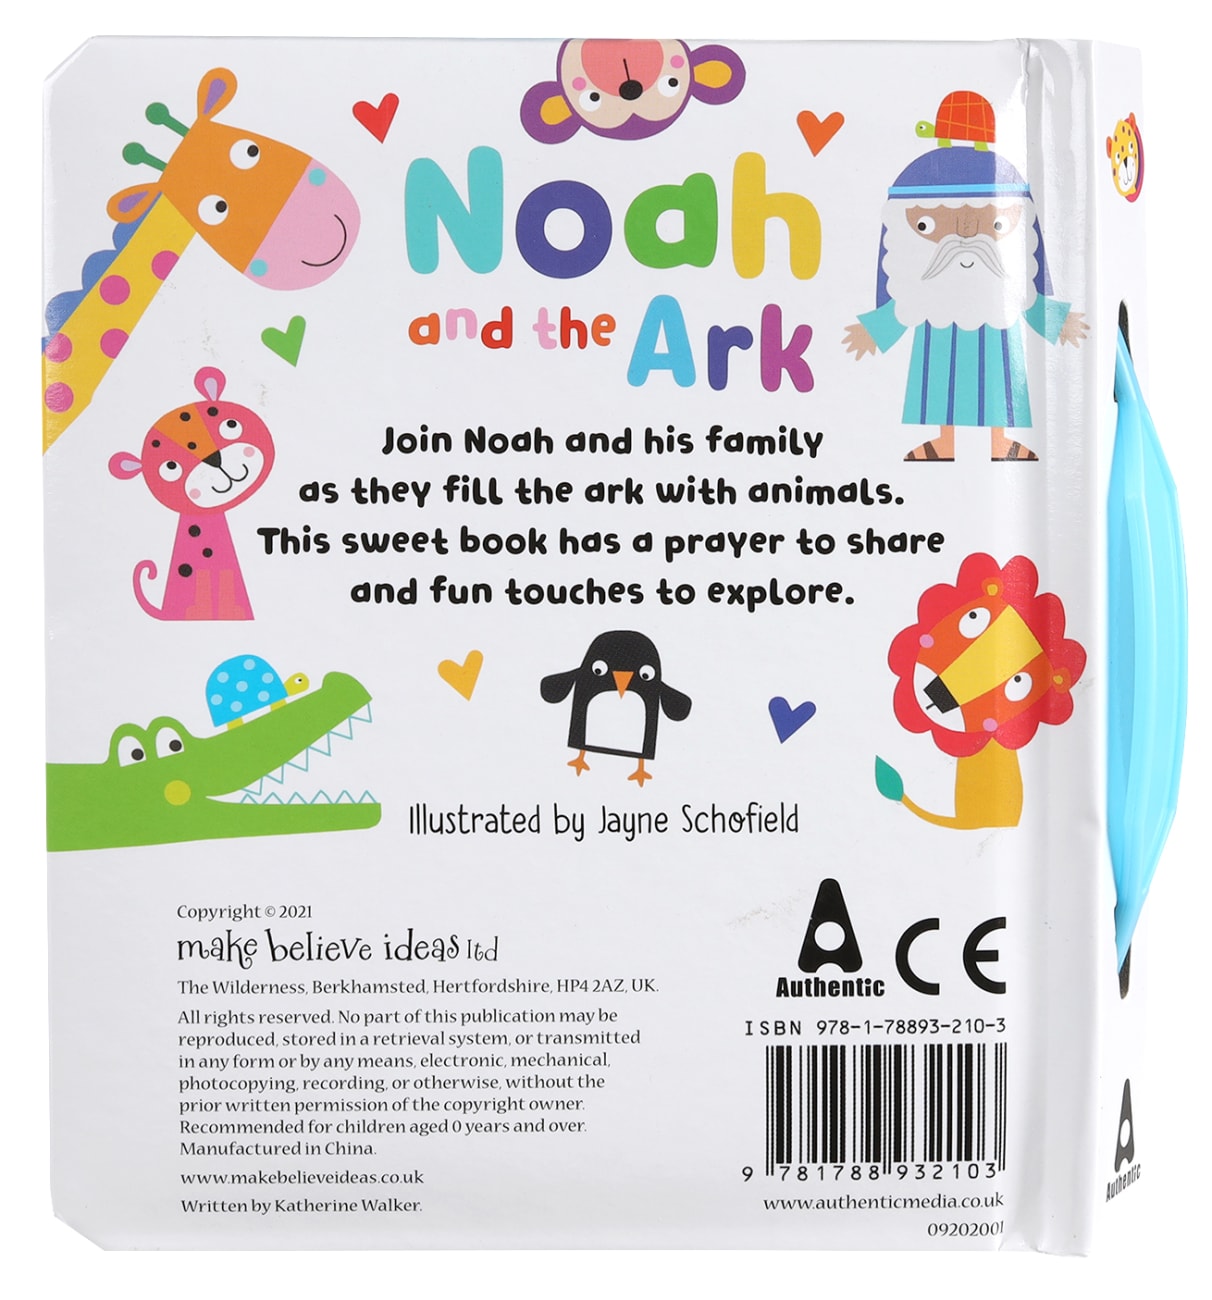 Noah and the Ark With Touch and Feel Padded Board Book